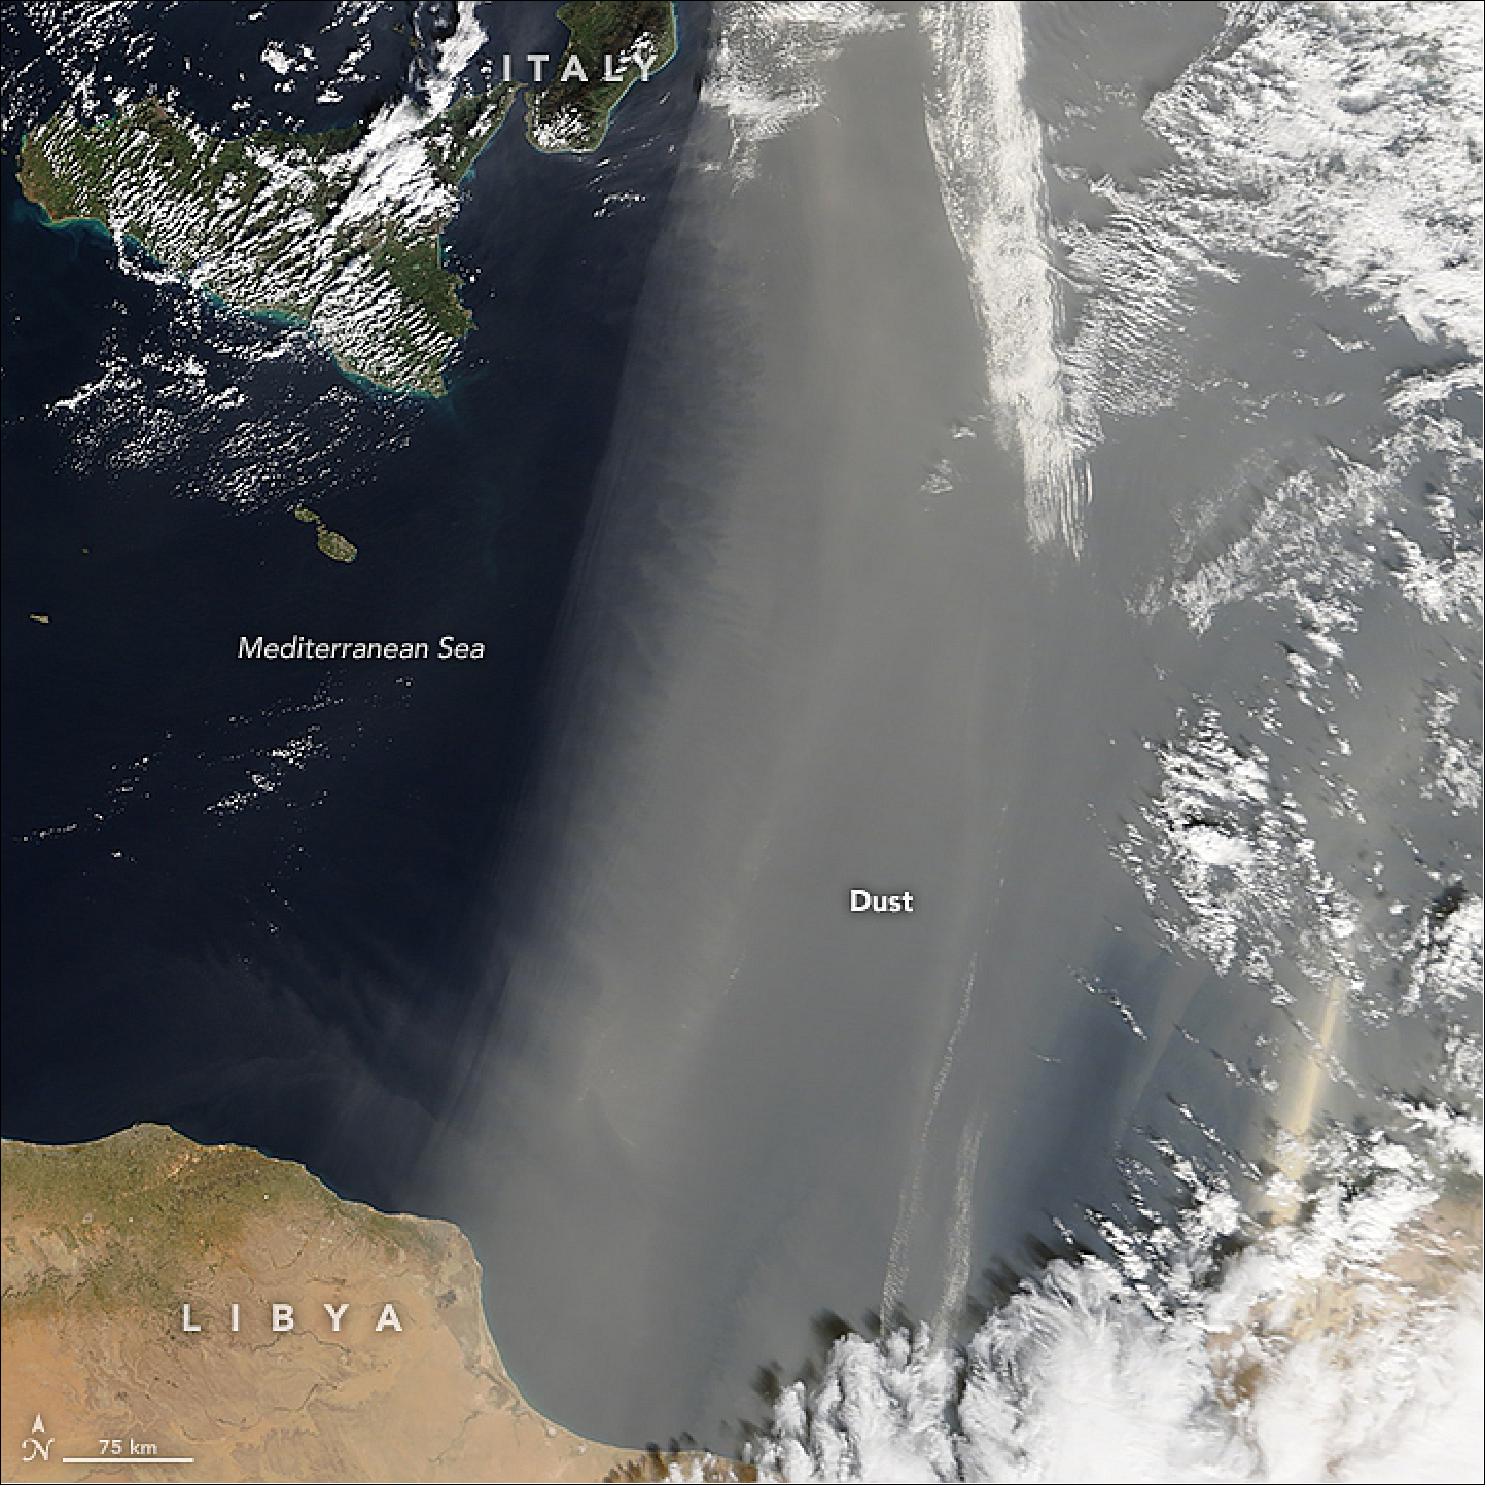 Figure 35: The MODIS instrument on Terra captured on 7 Feb. this image of a Sahara Storm carrying great amounts of sand north over the Mediterranean Sea (image credit: NASA Earth Observatory, images by Jeff Schmaltz, using MODIS data from LANCE/EOSDIS Rapid Response ,caption by Kathryn Hansen)